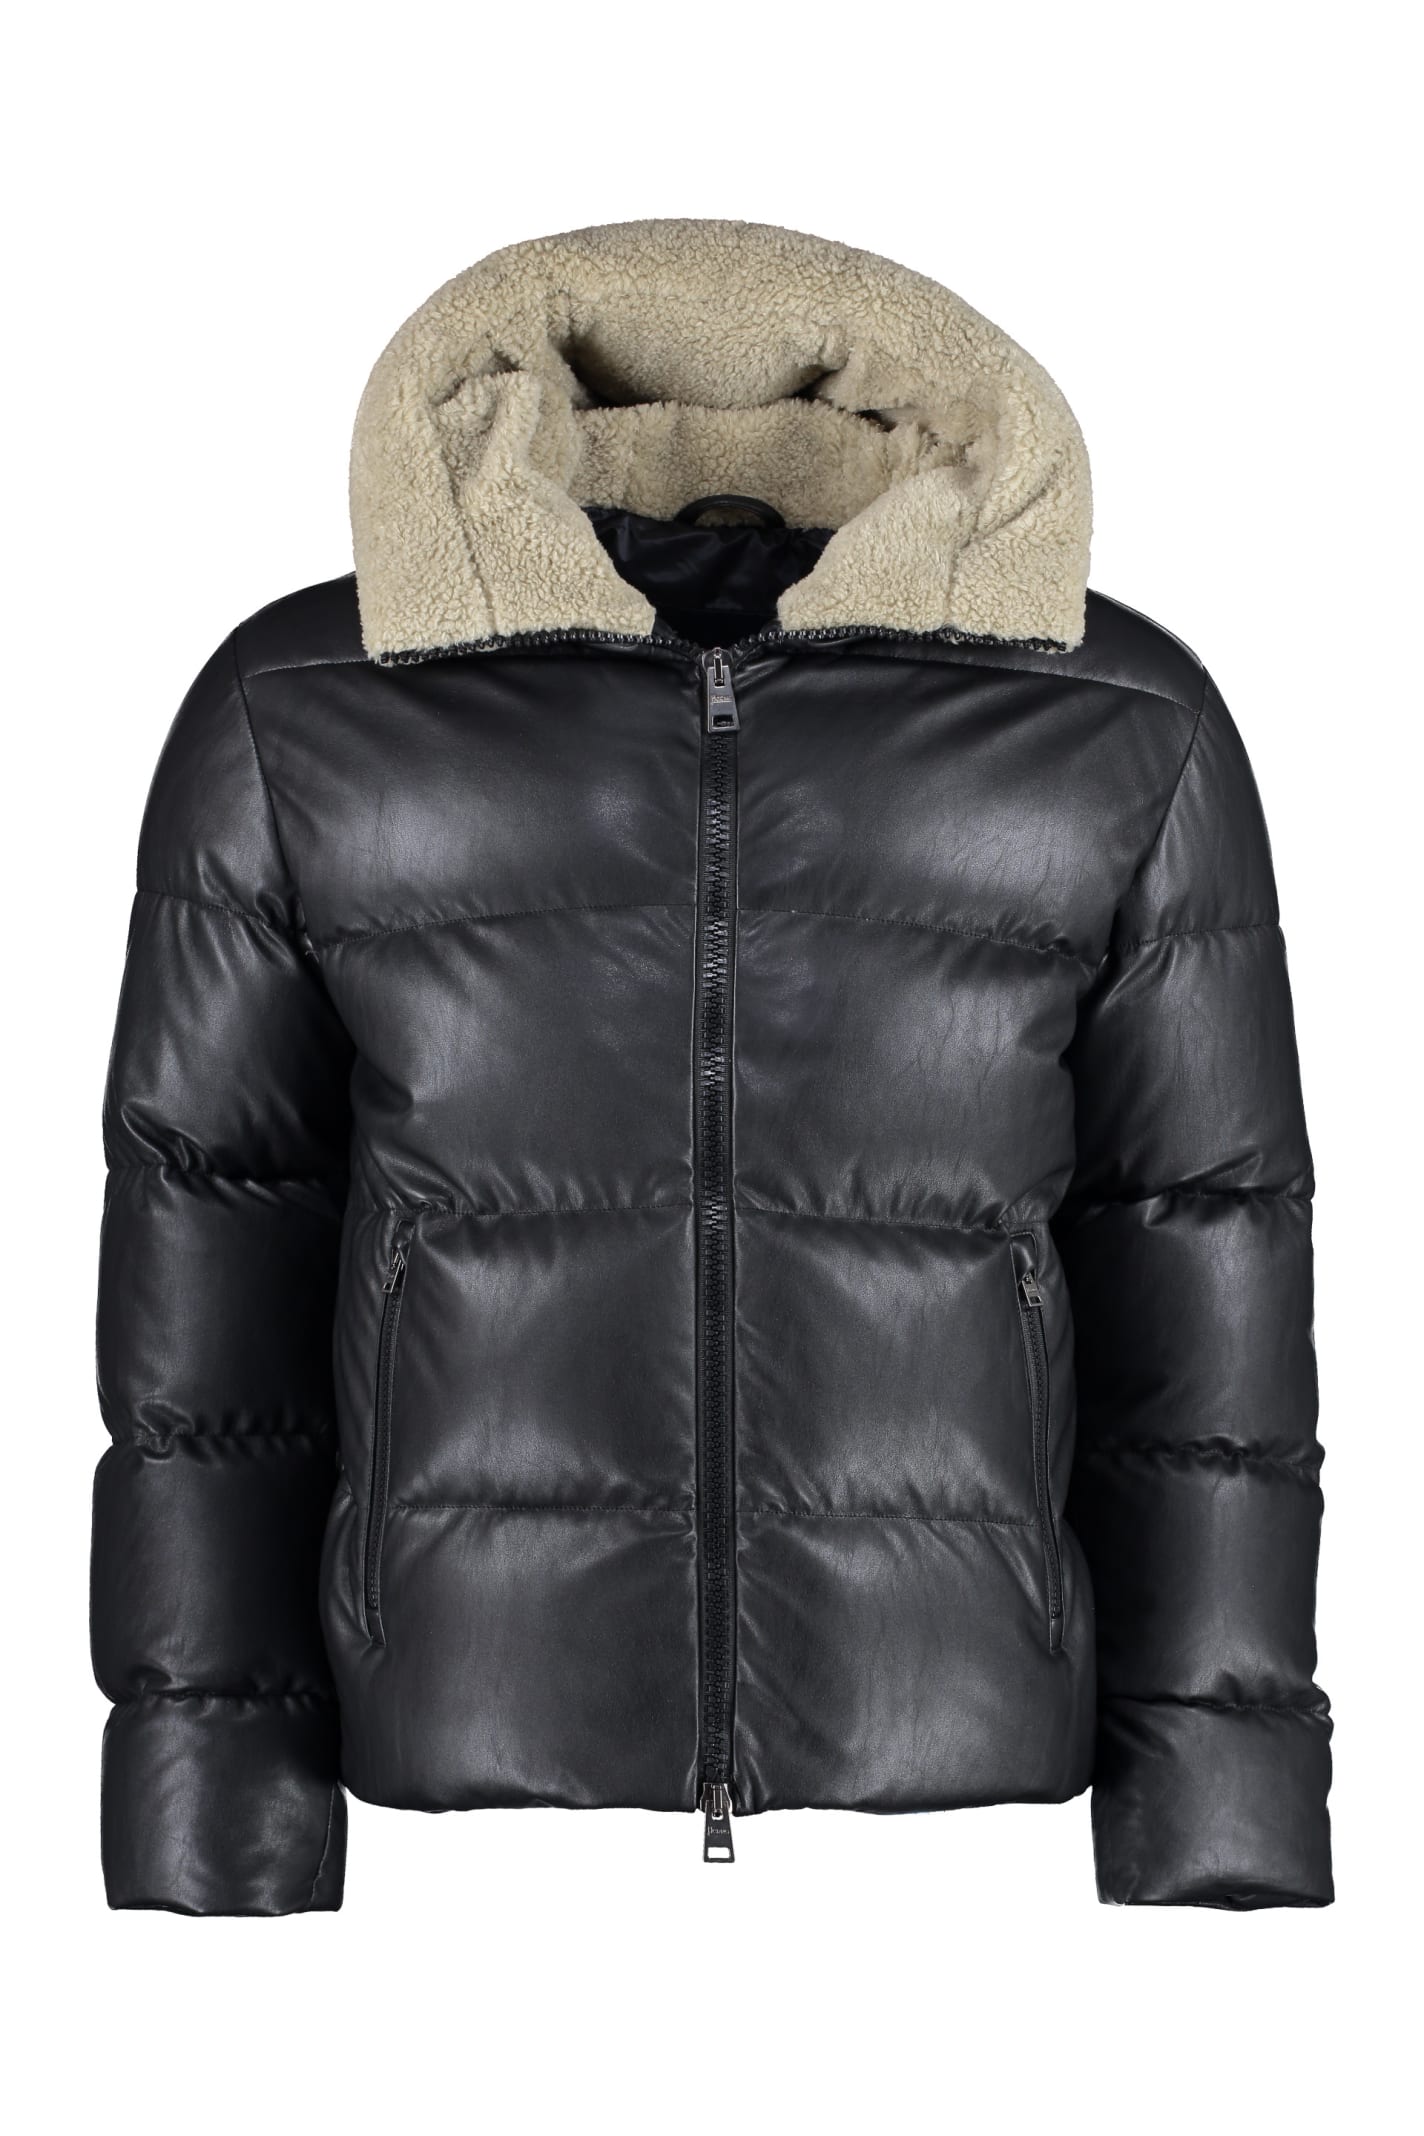 Herno Hooded Bomber-style Down Jacket